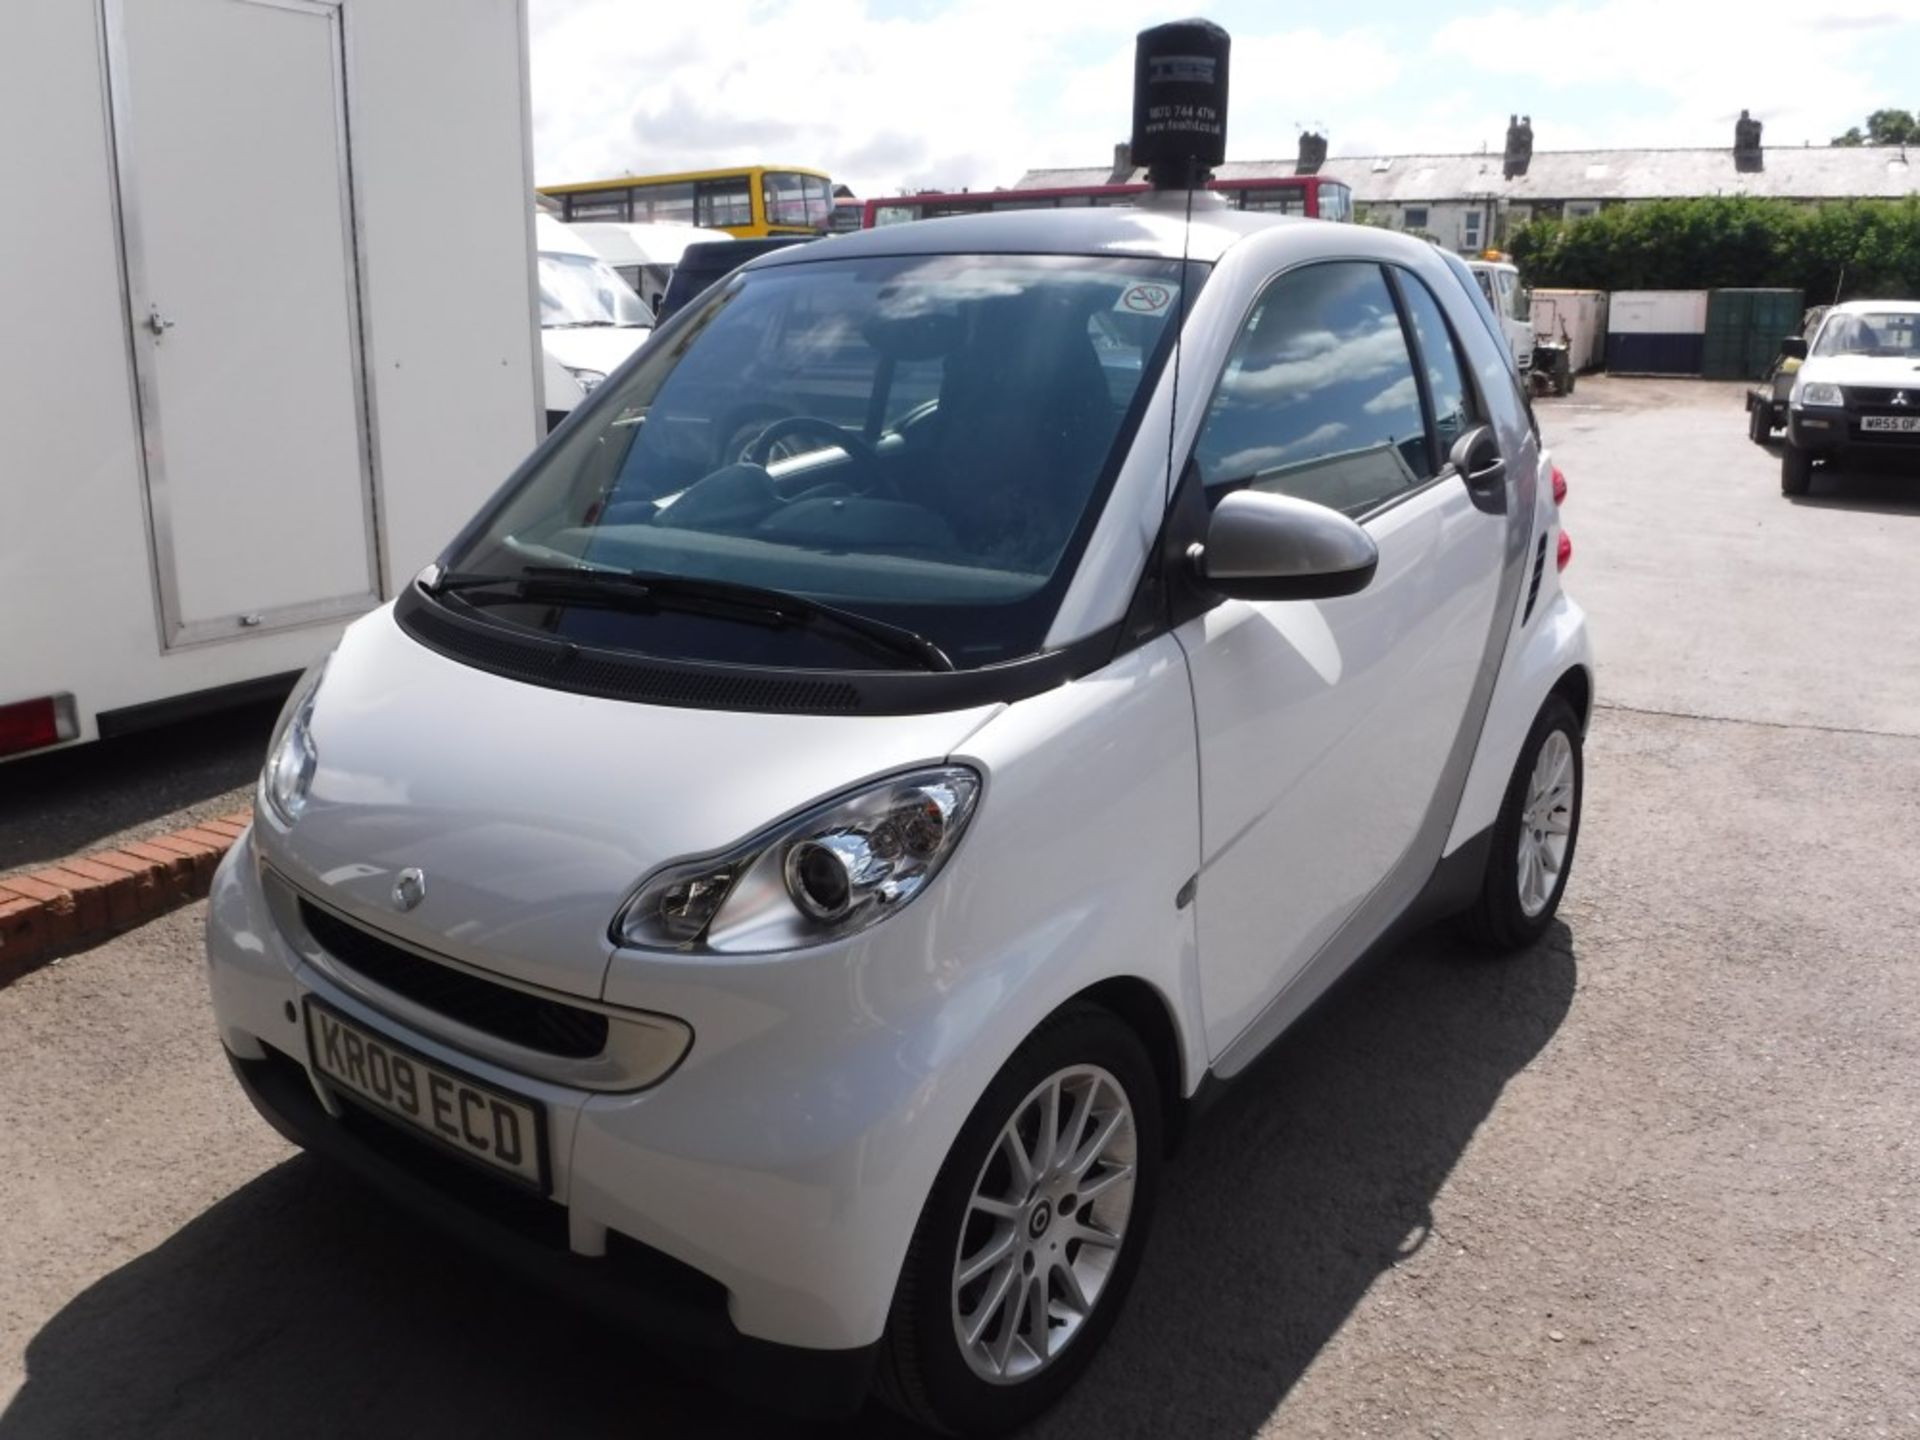 09 ref SMART FORTWO PASSION CDI AUTO COUPE, 1ST REG 06/09, TEST 06/16, 42483M WARRANTED, V5 HERE, - Image 2 of 5